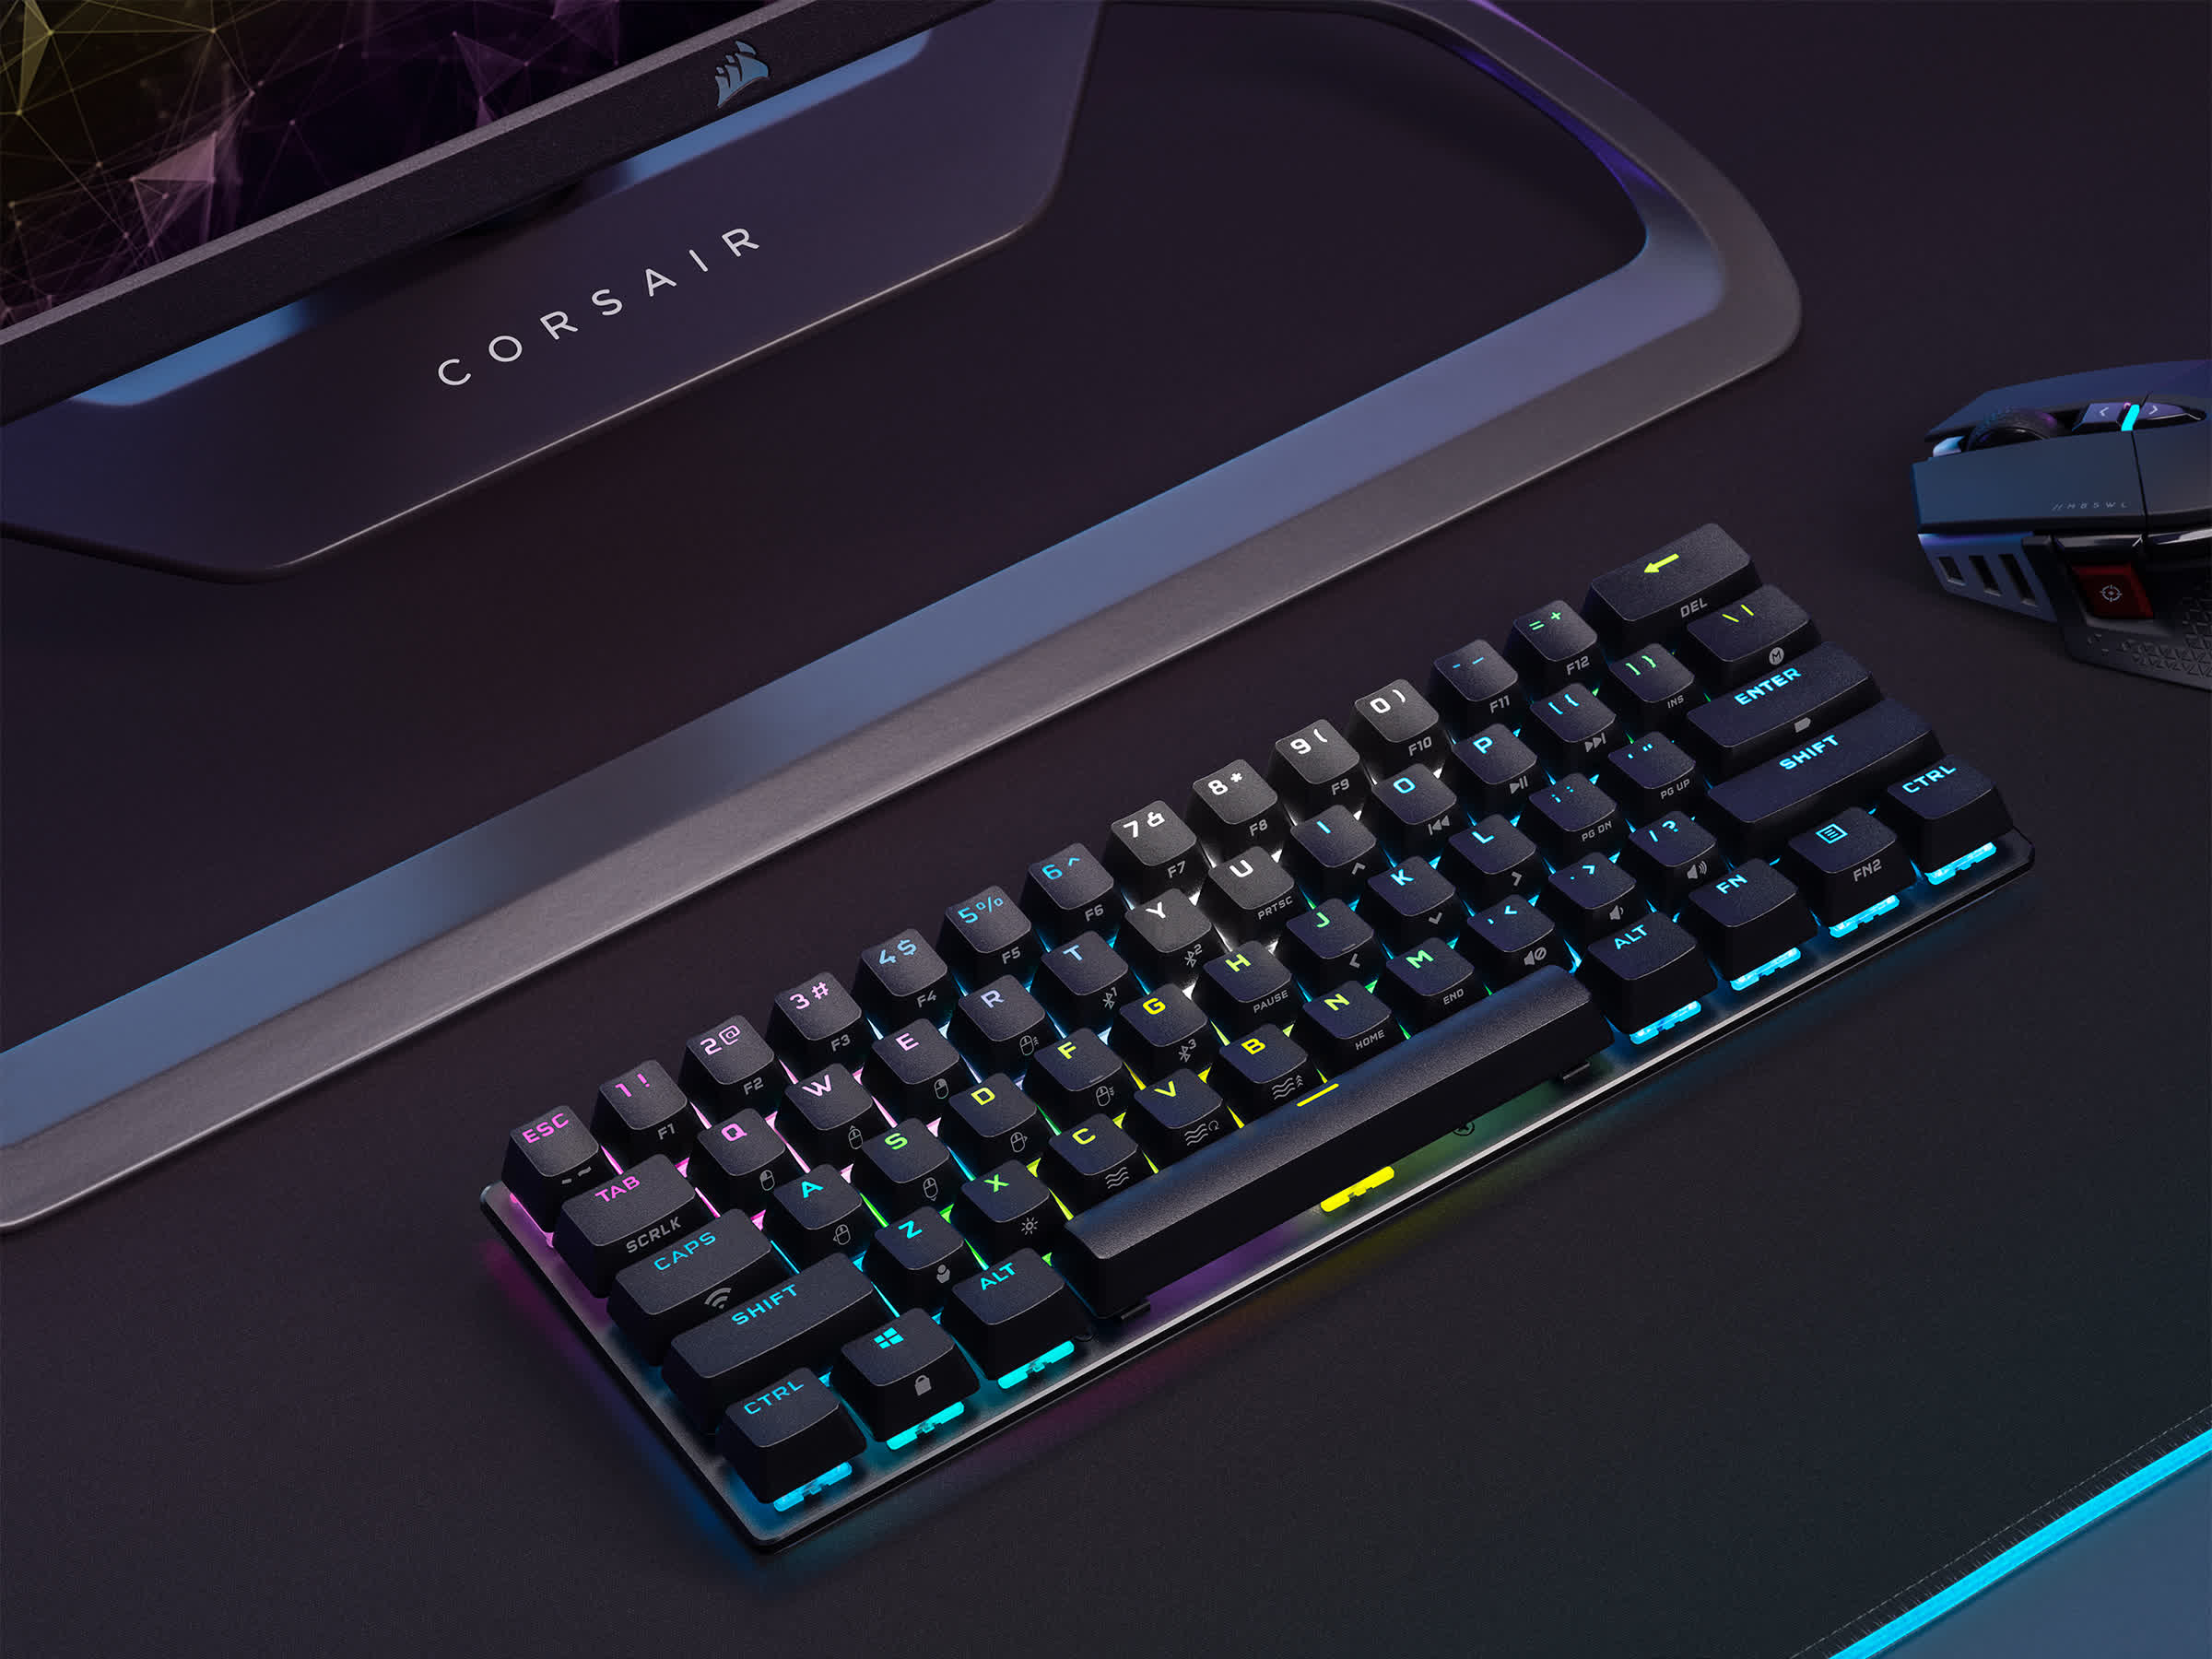 Corsair's latest mechanical keyboard is its most customizable yet